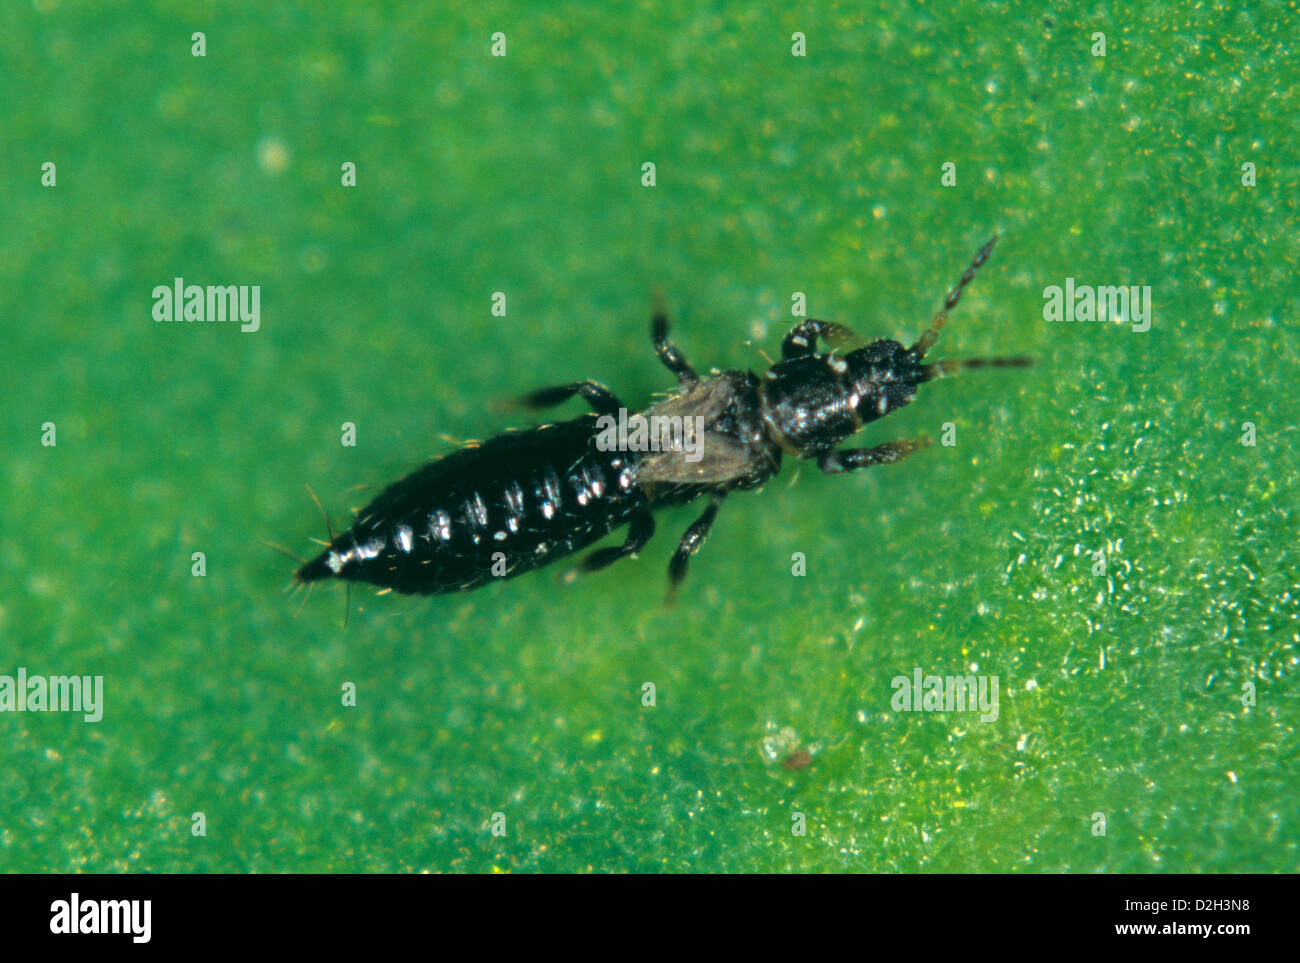 Un champ, les thrips thrips angusticeps, nymphe sur une feuille Banque D'Images